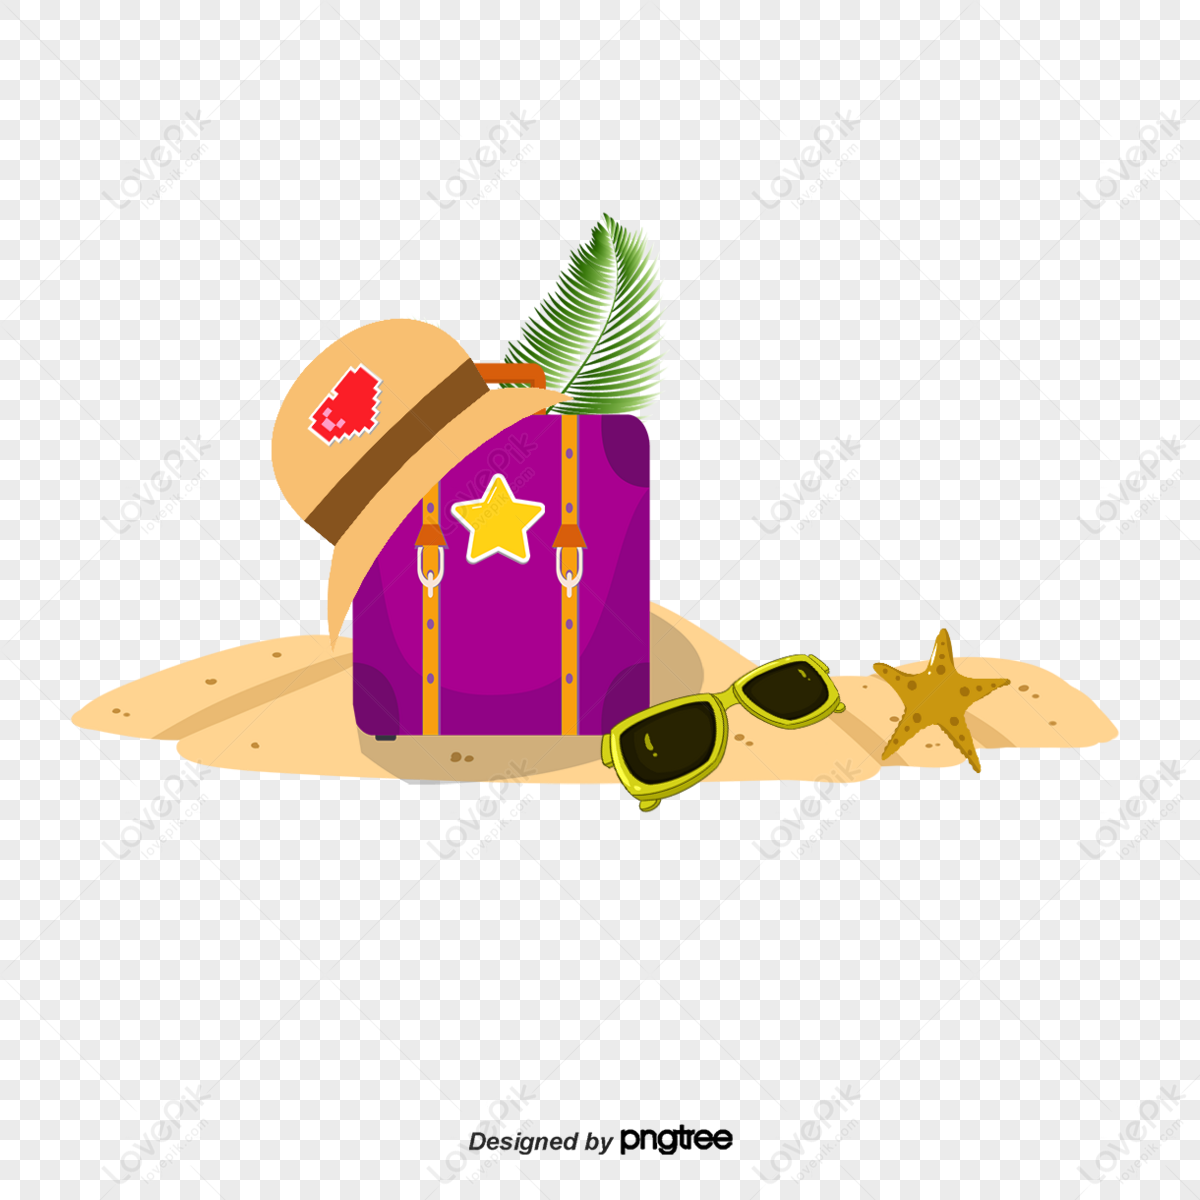 island trip wants to travel,cartoon,trip traveling,island travel equipment png transparent background